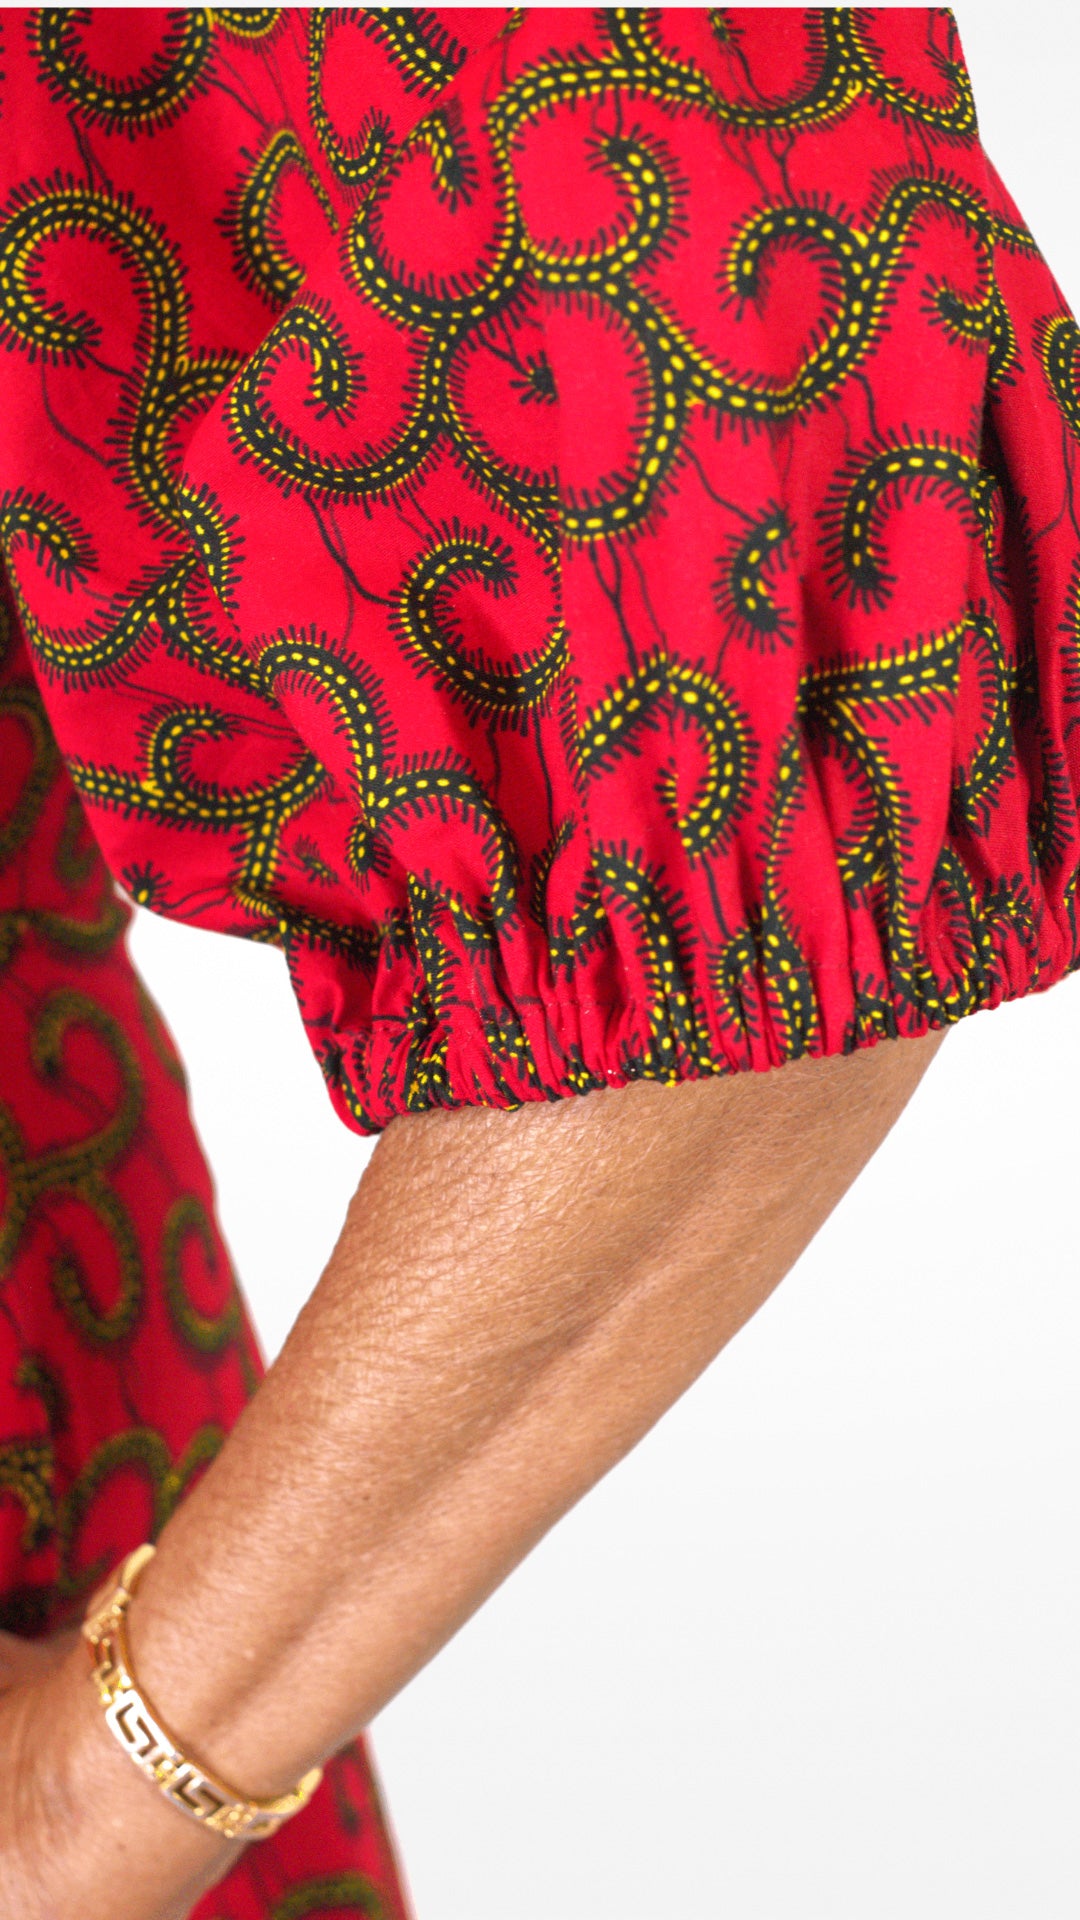 A close up of the puff sleeve of the red dress and its swirly details.